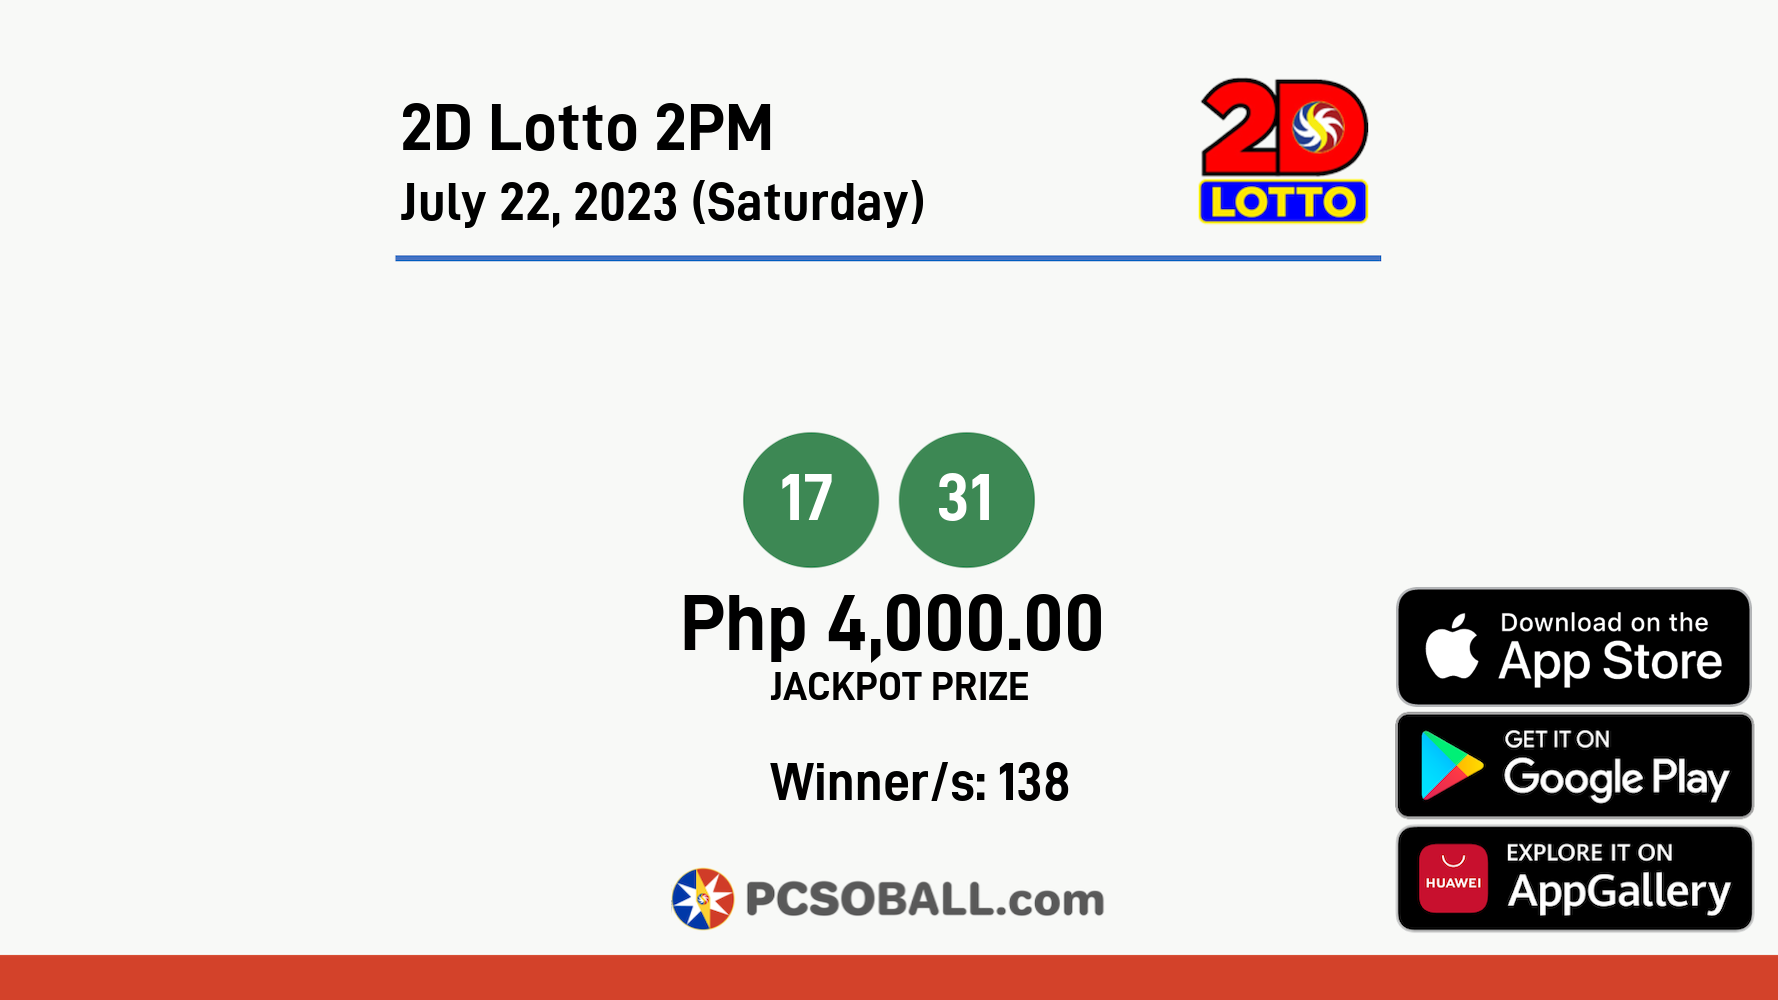 2D Lotto 2PM July 22, 2023 (Saturday) Result